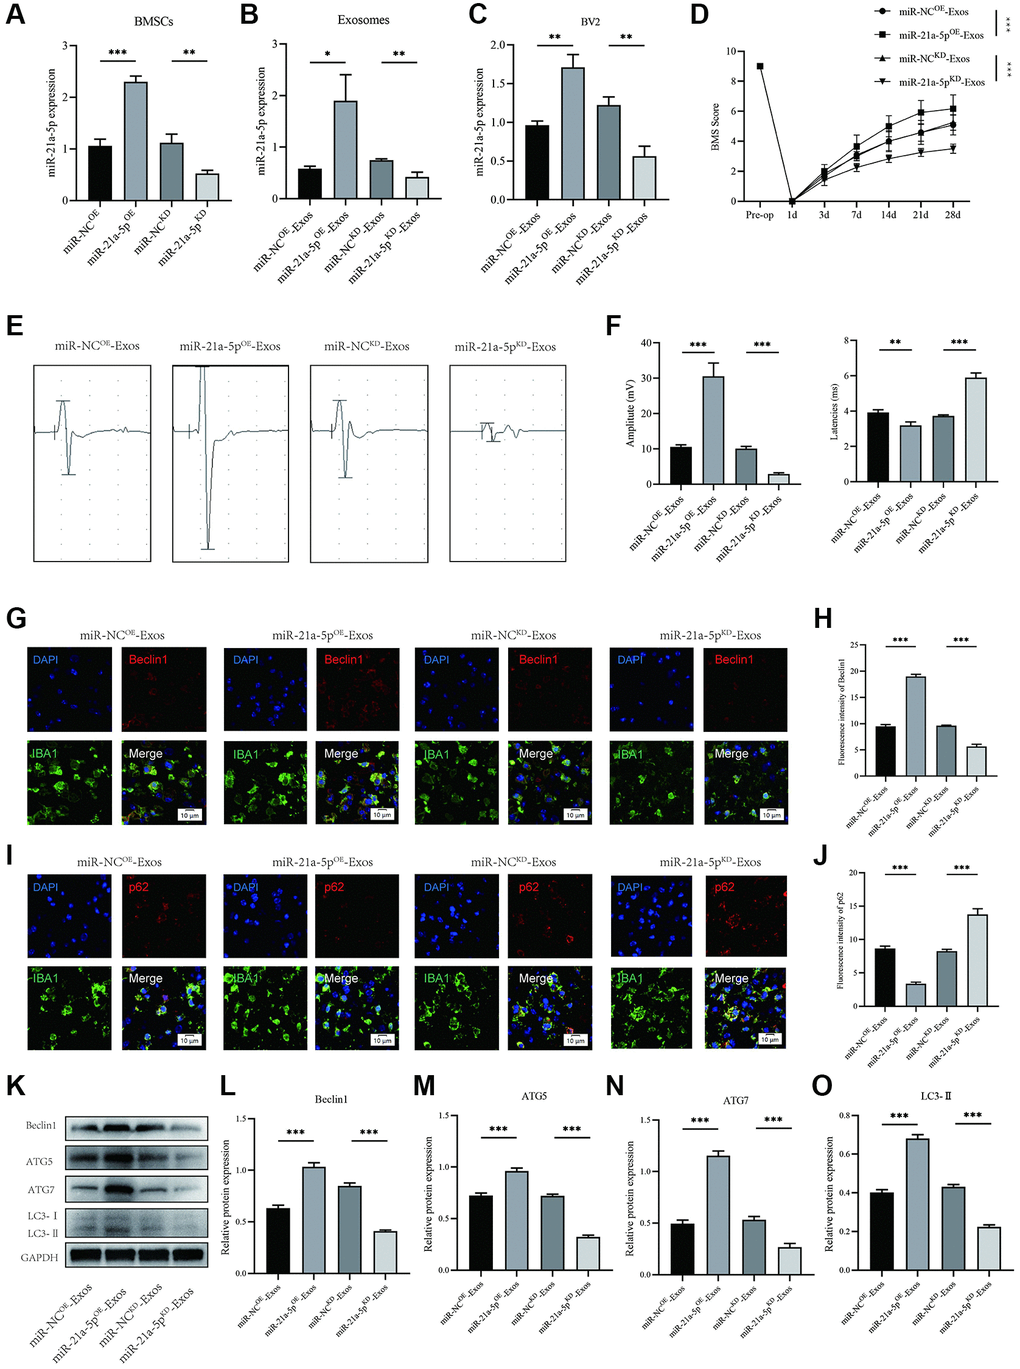 BMSCs-derived exosomes enhance macrophage/microglia autophagy and promote motor function recovery after SCI by delivering miR-21a-5p. (A) Transfection efficiency of miR-21a-5p overexpression and knockdown in BMSCs; (B) The relative expression of miR-21a-5p in BMSCs-derived exosomes in indicated groups; (C) The relative expression of miR-21a-5p in BV2 cells administered with miR-NCOE-Exos, miR-21a-5pOE-Exos, miR-NCKD-Exos, and miR-21a-5pKD-Exos; (D) BMS was used to functionally grade mice in different groups on the 28th day after injury; (E) MEP analysis was used as an electrophysiological assessment after SCI. (F) Quantification of MEP amplitudes and latencies in mice (n = 6); (G) Representative immunostaining images of IBA1 and Beclin1 in mice of different groups on the 7th day after injury; (H) Quantification of fluorescence intensity; (I) Representative immunostaining images of IBA1 and p62 in mice of different groups on the 7th day after injury; (J) Quantification of fluorescence intensity; (K–O) Western blot detection and quantitative analysis of Beclin1, ATG5, ATG7, LC3-II (*p **p ***p 